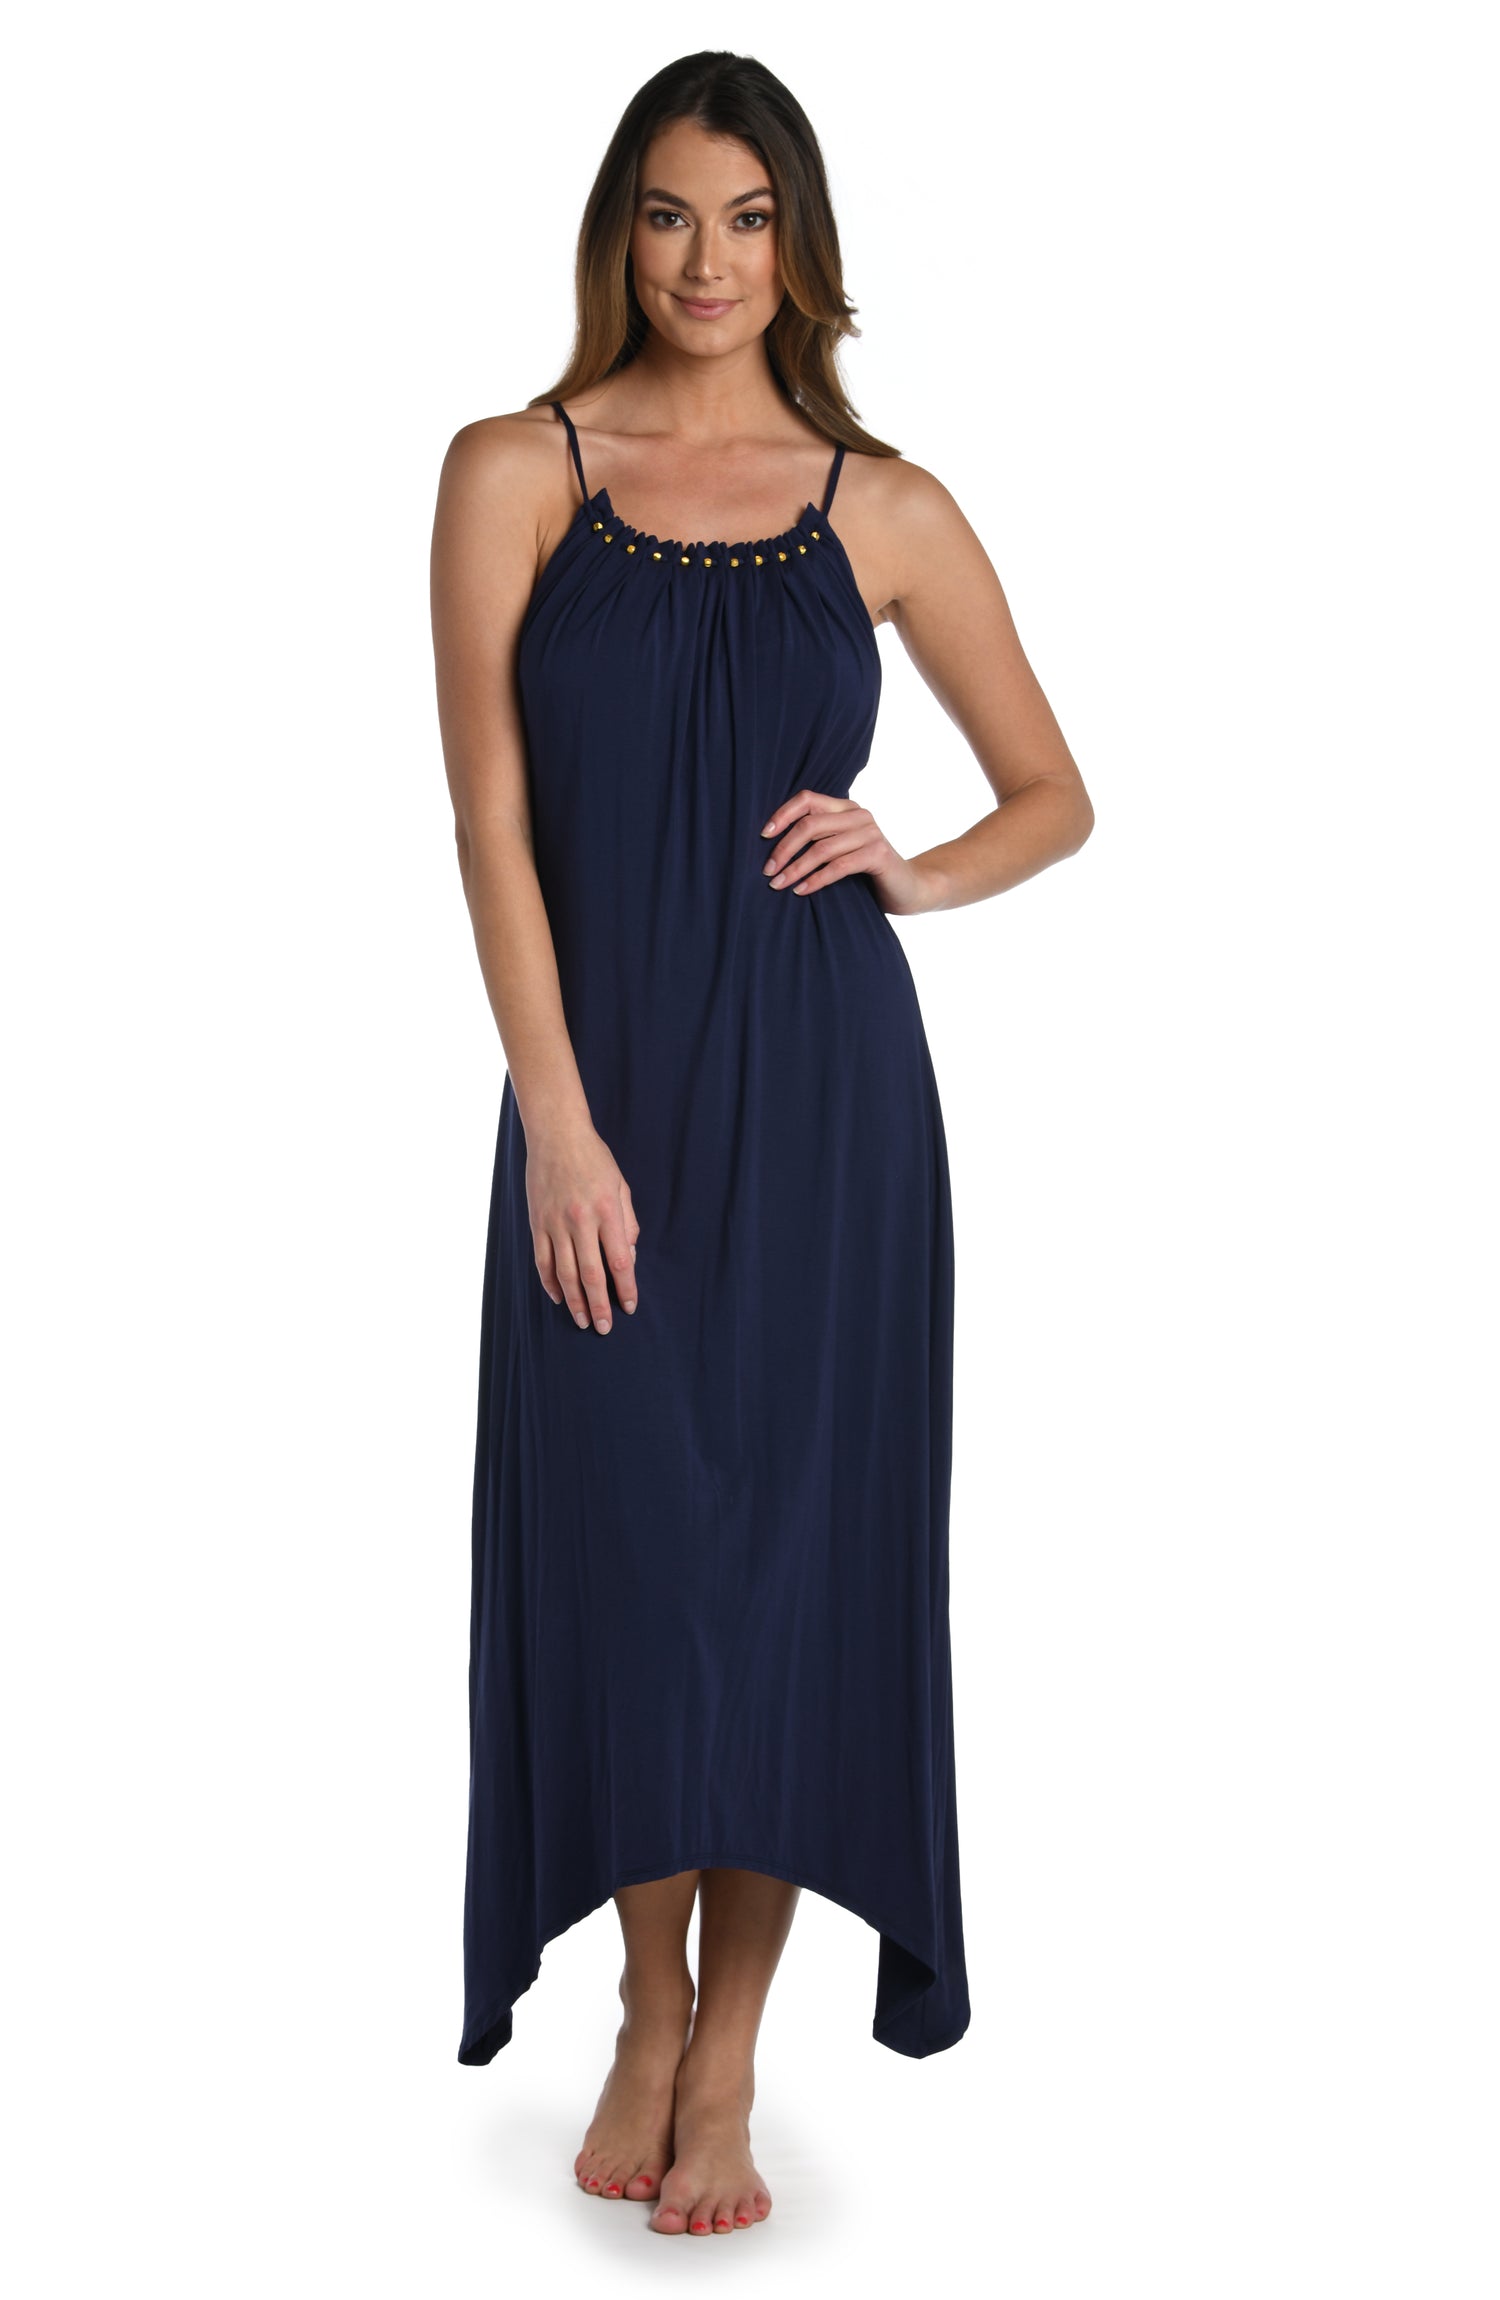 Model is wearing a deep indigo colored halter midi dress cover up from our Beaded Covers collection!